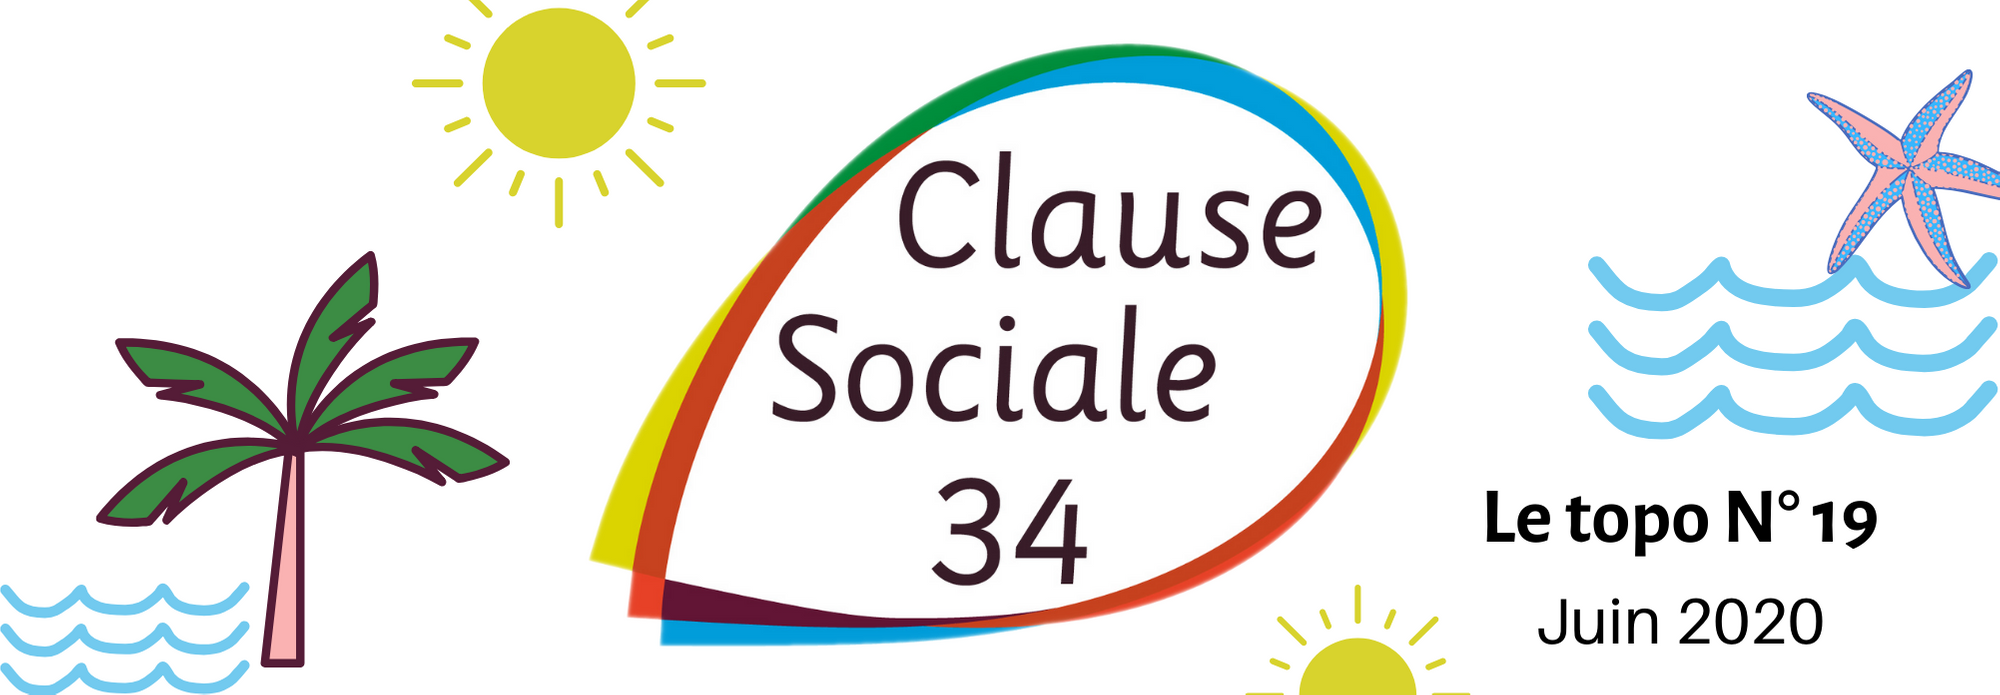 Mission Interinstitutionnelle Clause Sociale 34